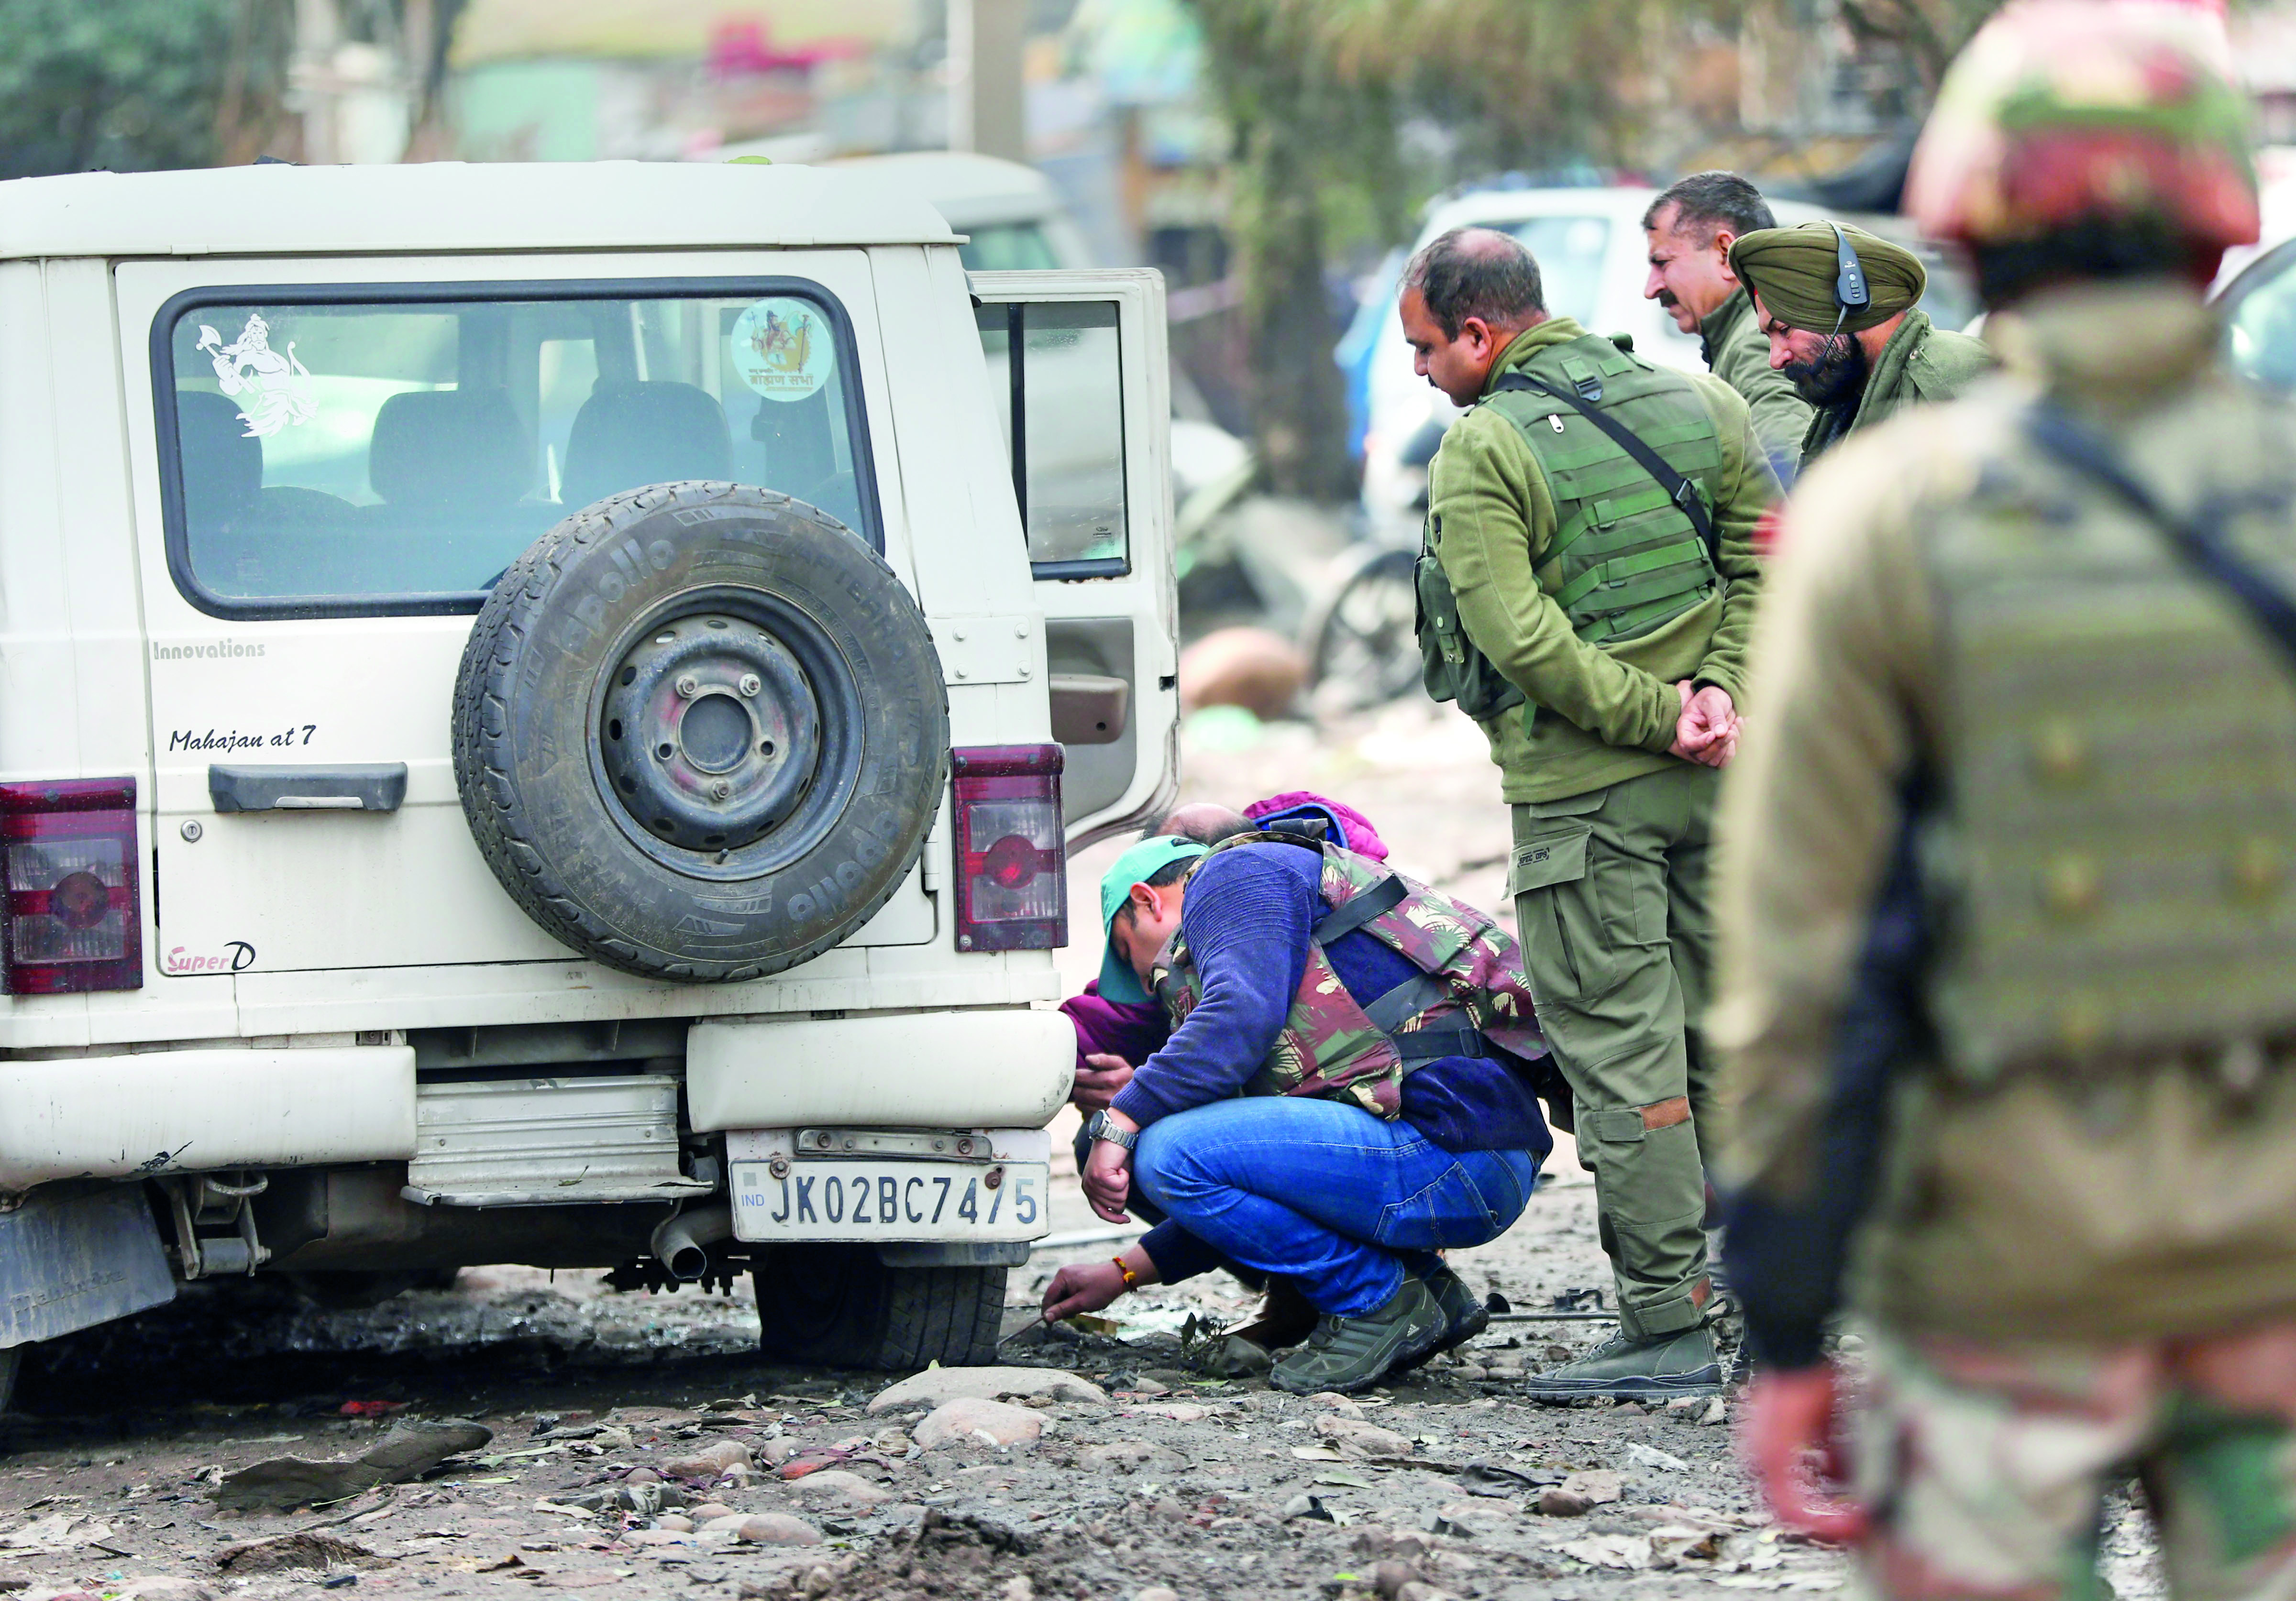 7 injured in twin blasts amid heightened security